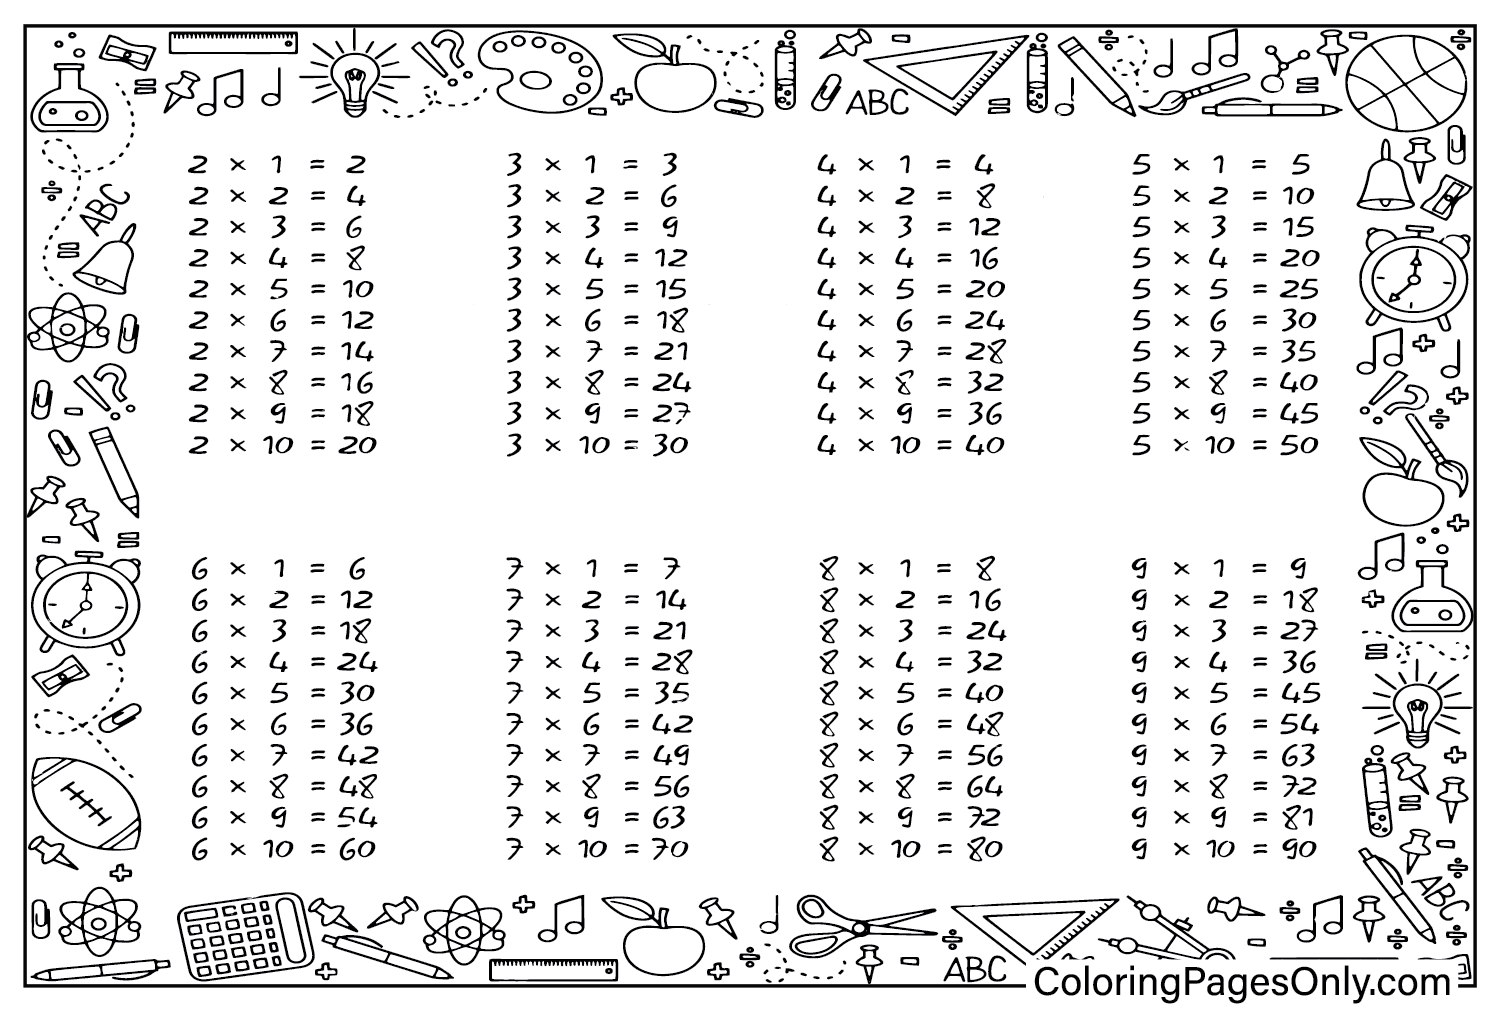 Multiplication Chart Coloring Sheet for Kids from Multiplication Chart